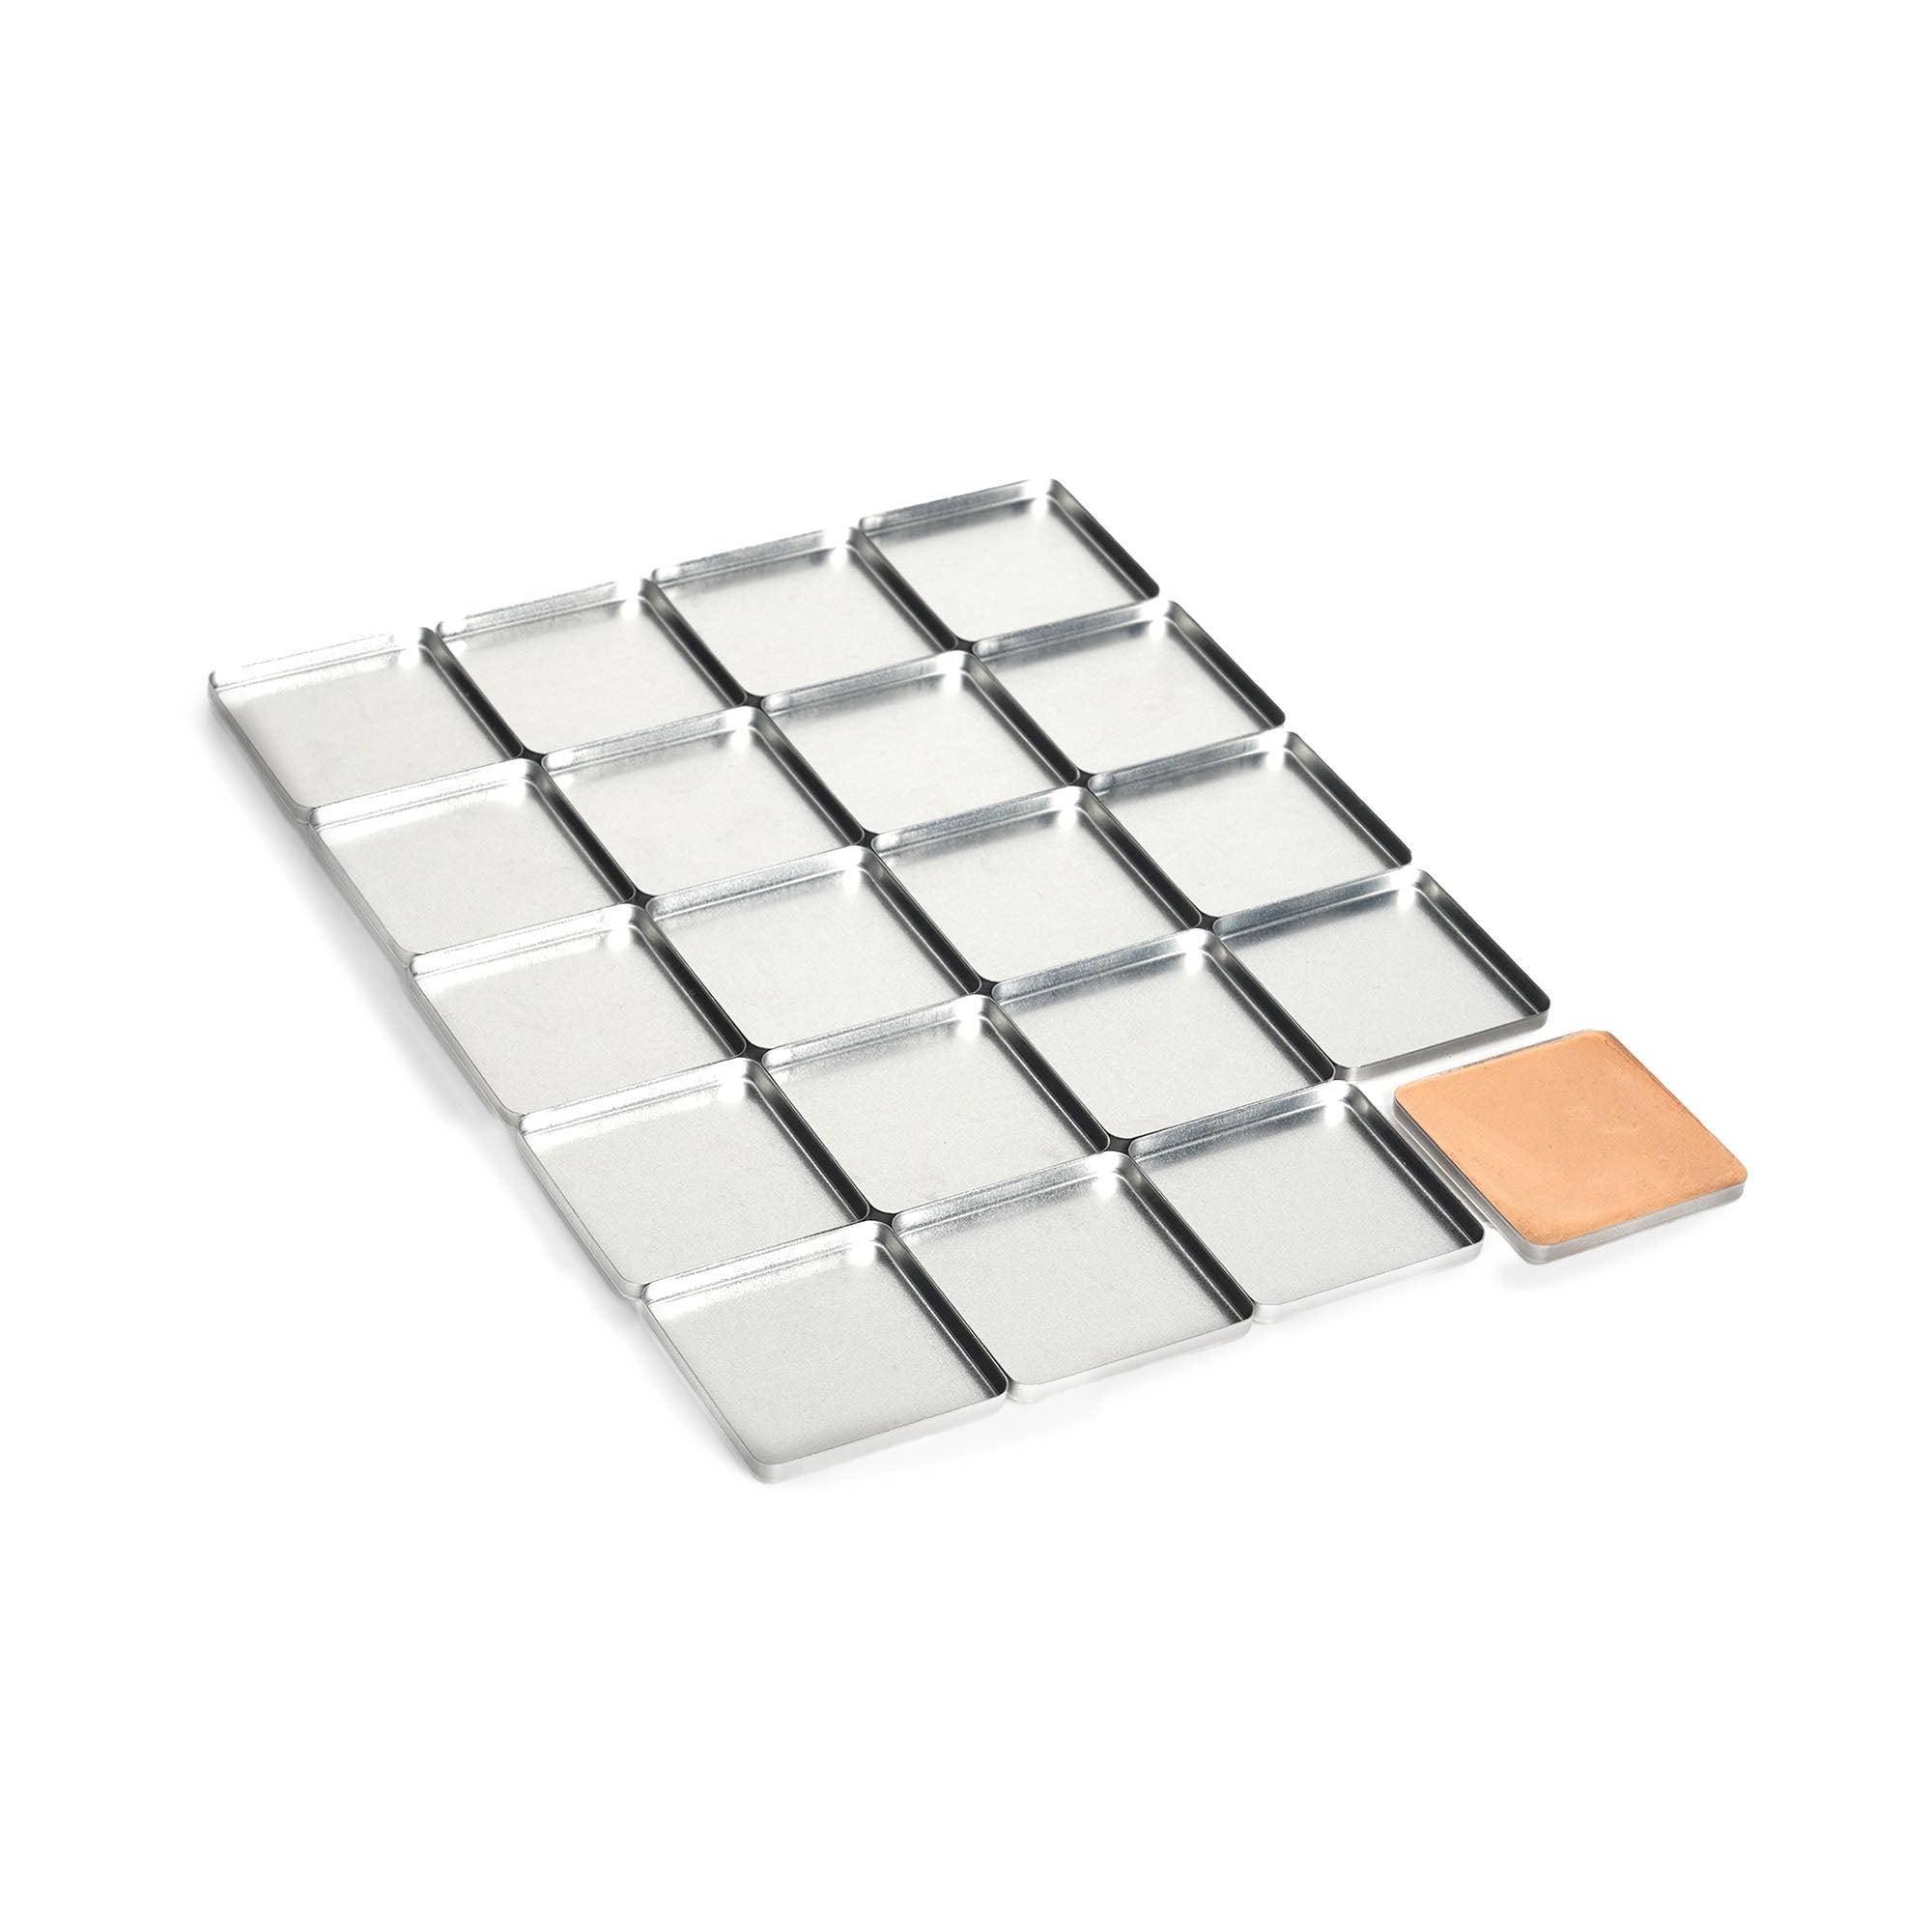 Twenty 20 square-shaped refill magnetic makeup pans, each measuring 41x41mm, for the FIXY Broken Makeup Repressing System, showcasing one pan with product to illustrate usage, ideal for repairing and customizing makeup